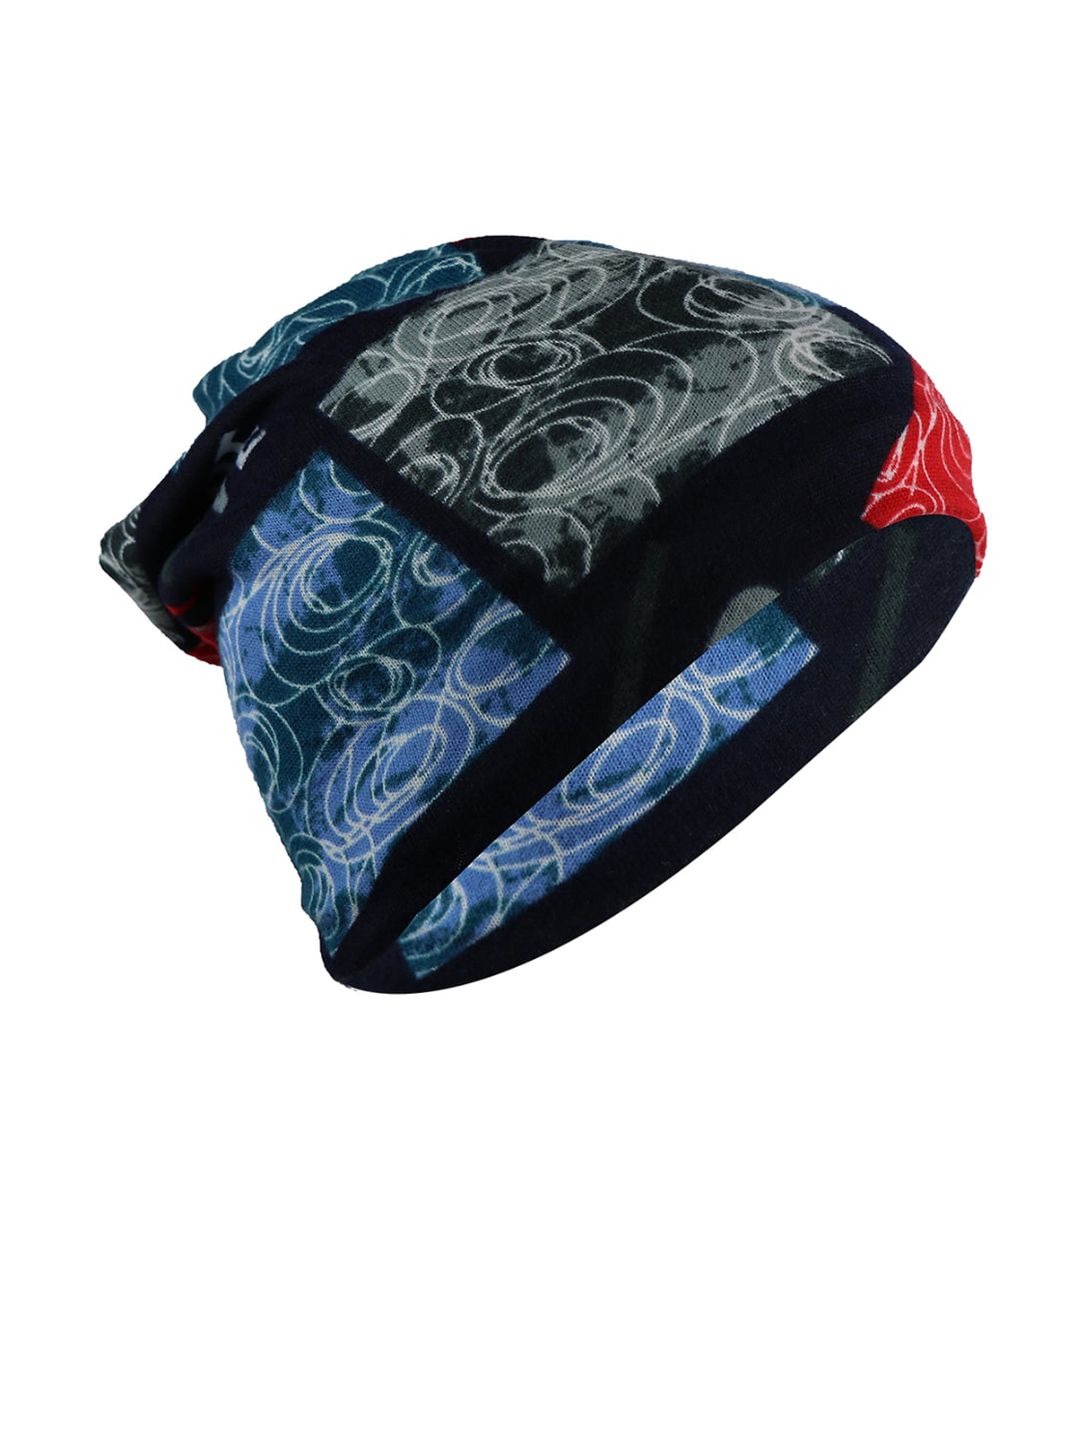 iSWEVEN Unisex Black & Blue Printed Beanie Price in India